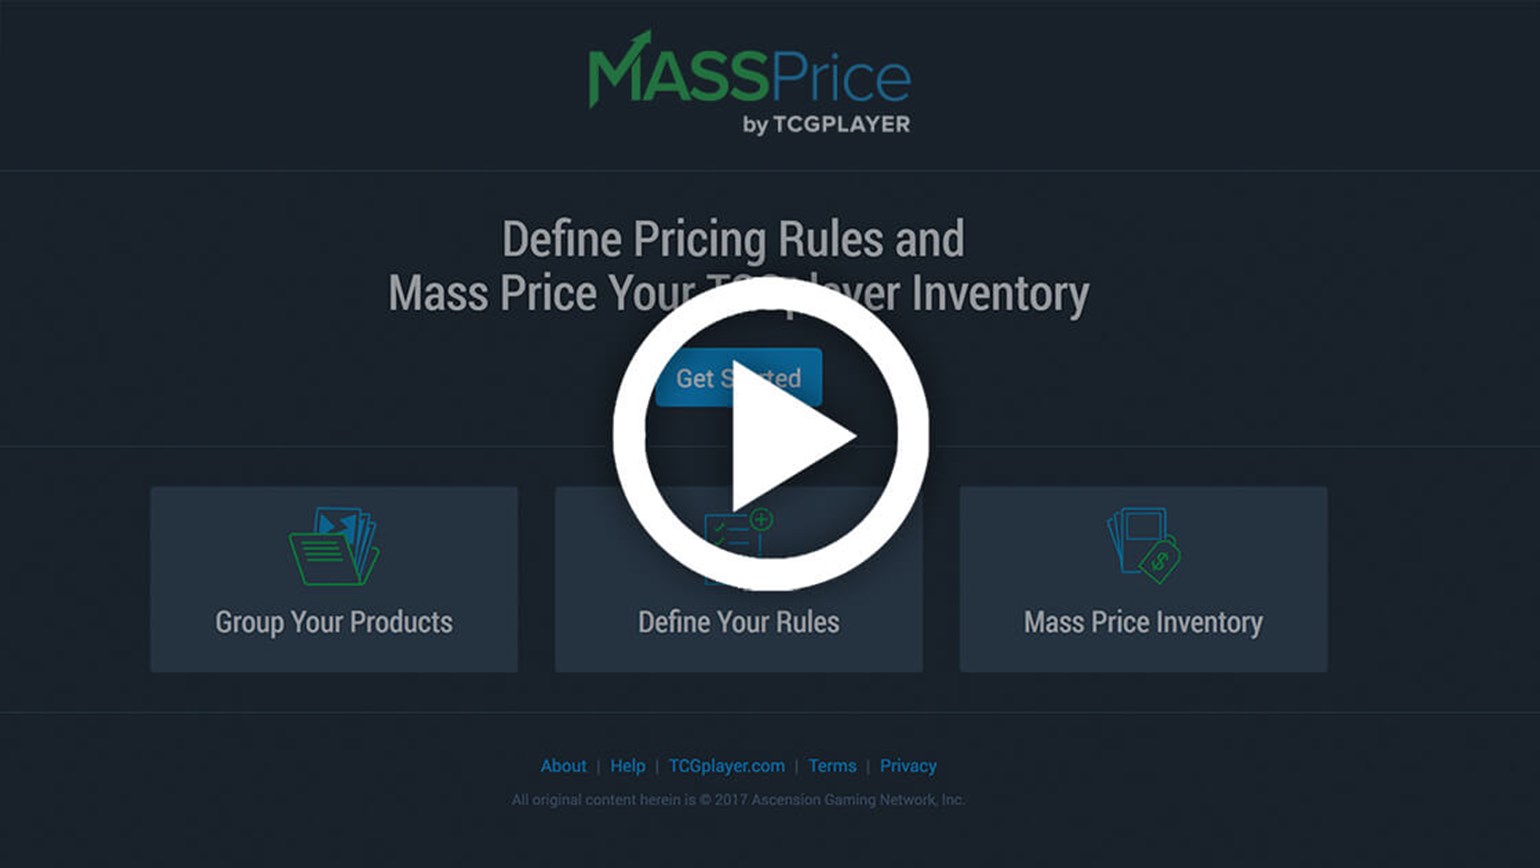 Free MassPrice App Now Available for Pro Sellers